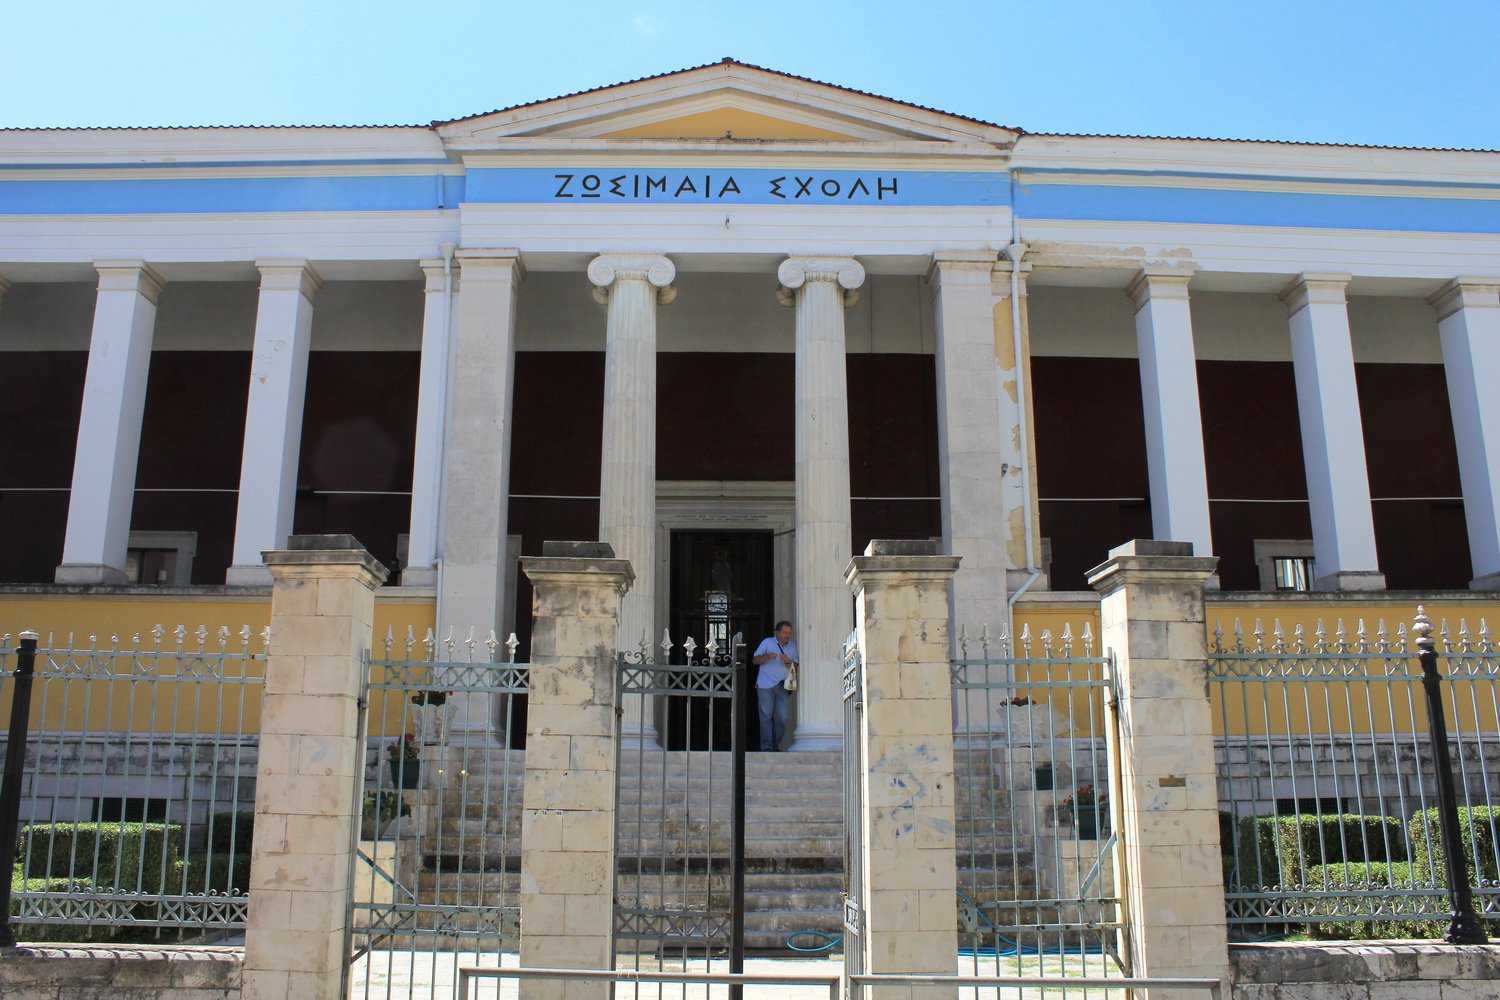 The Old Zosimaia School